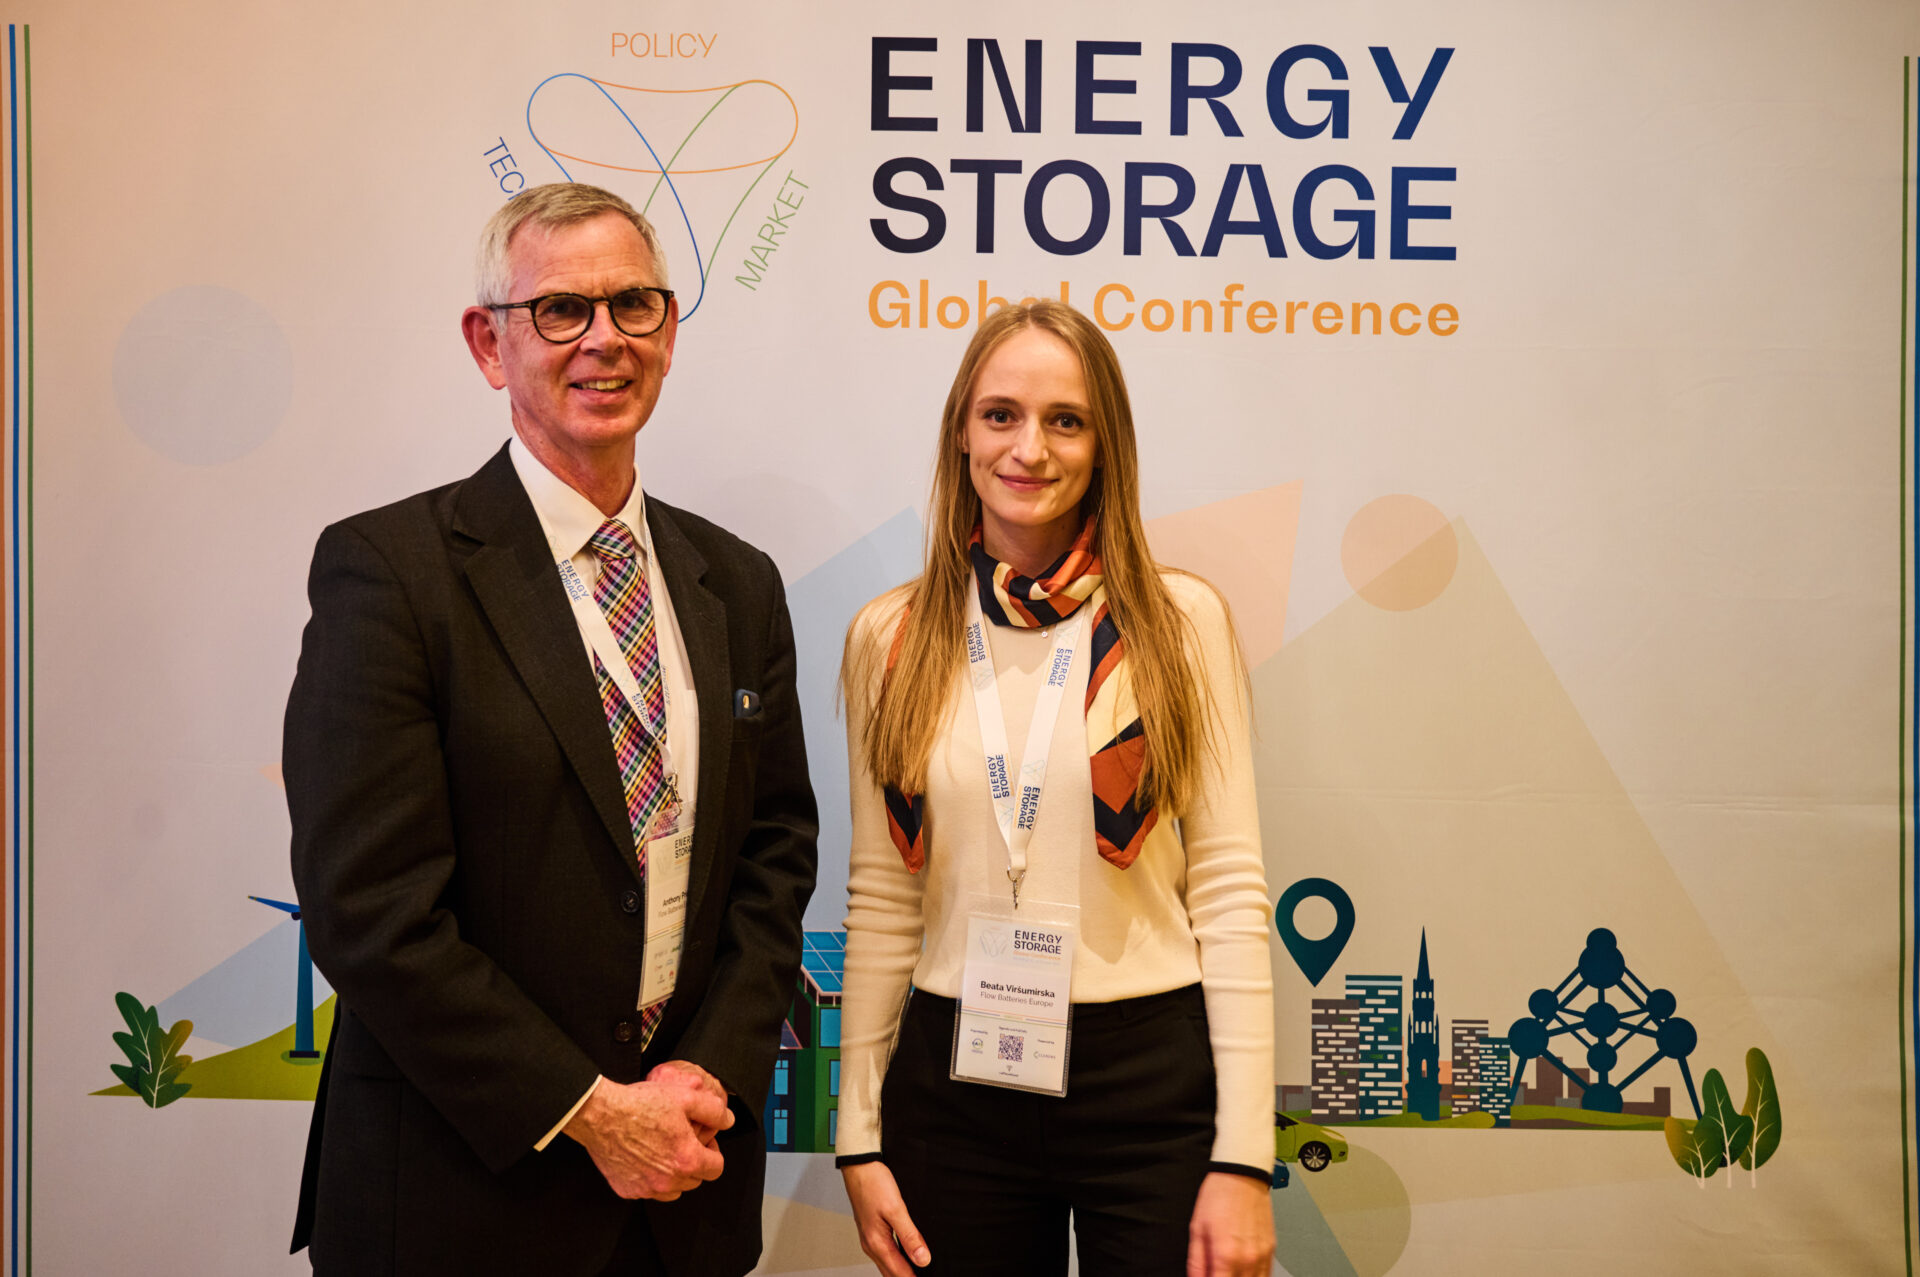 FBE’s key takeways from the Energy Storage Global Conference (ESGC)